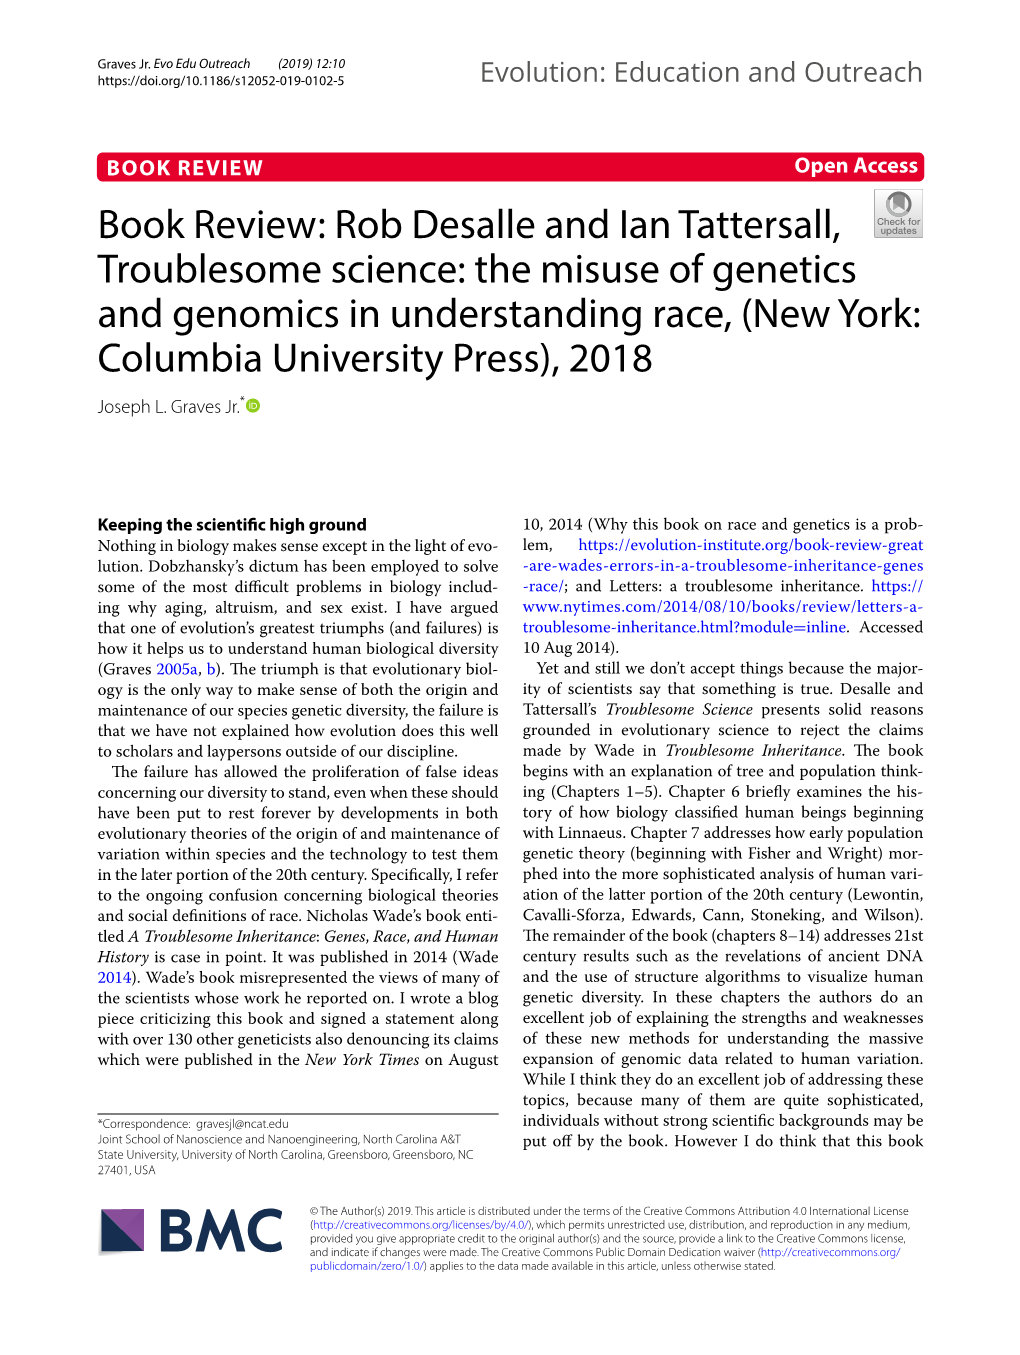 Book Review: Rob Desalle and Ian Tattersall, Troublesome Science: the Misuse of Genetics and Genomics in Understanding Race